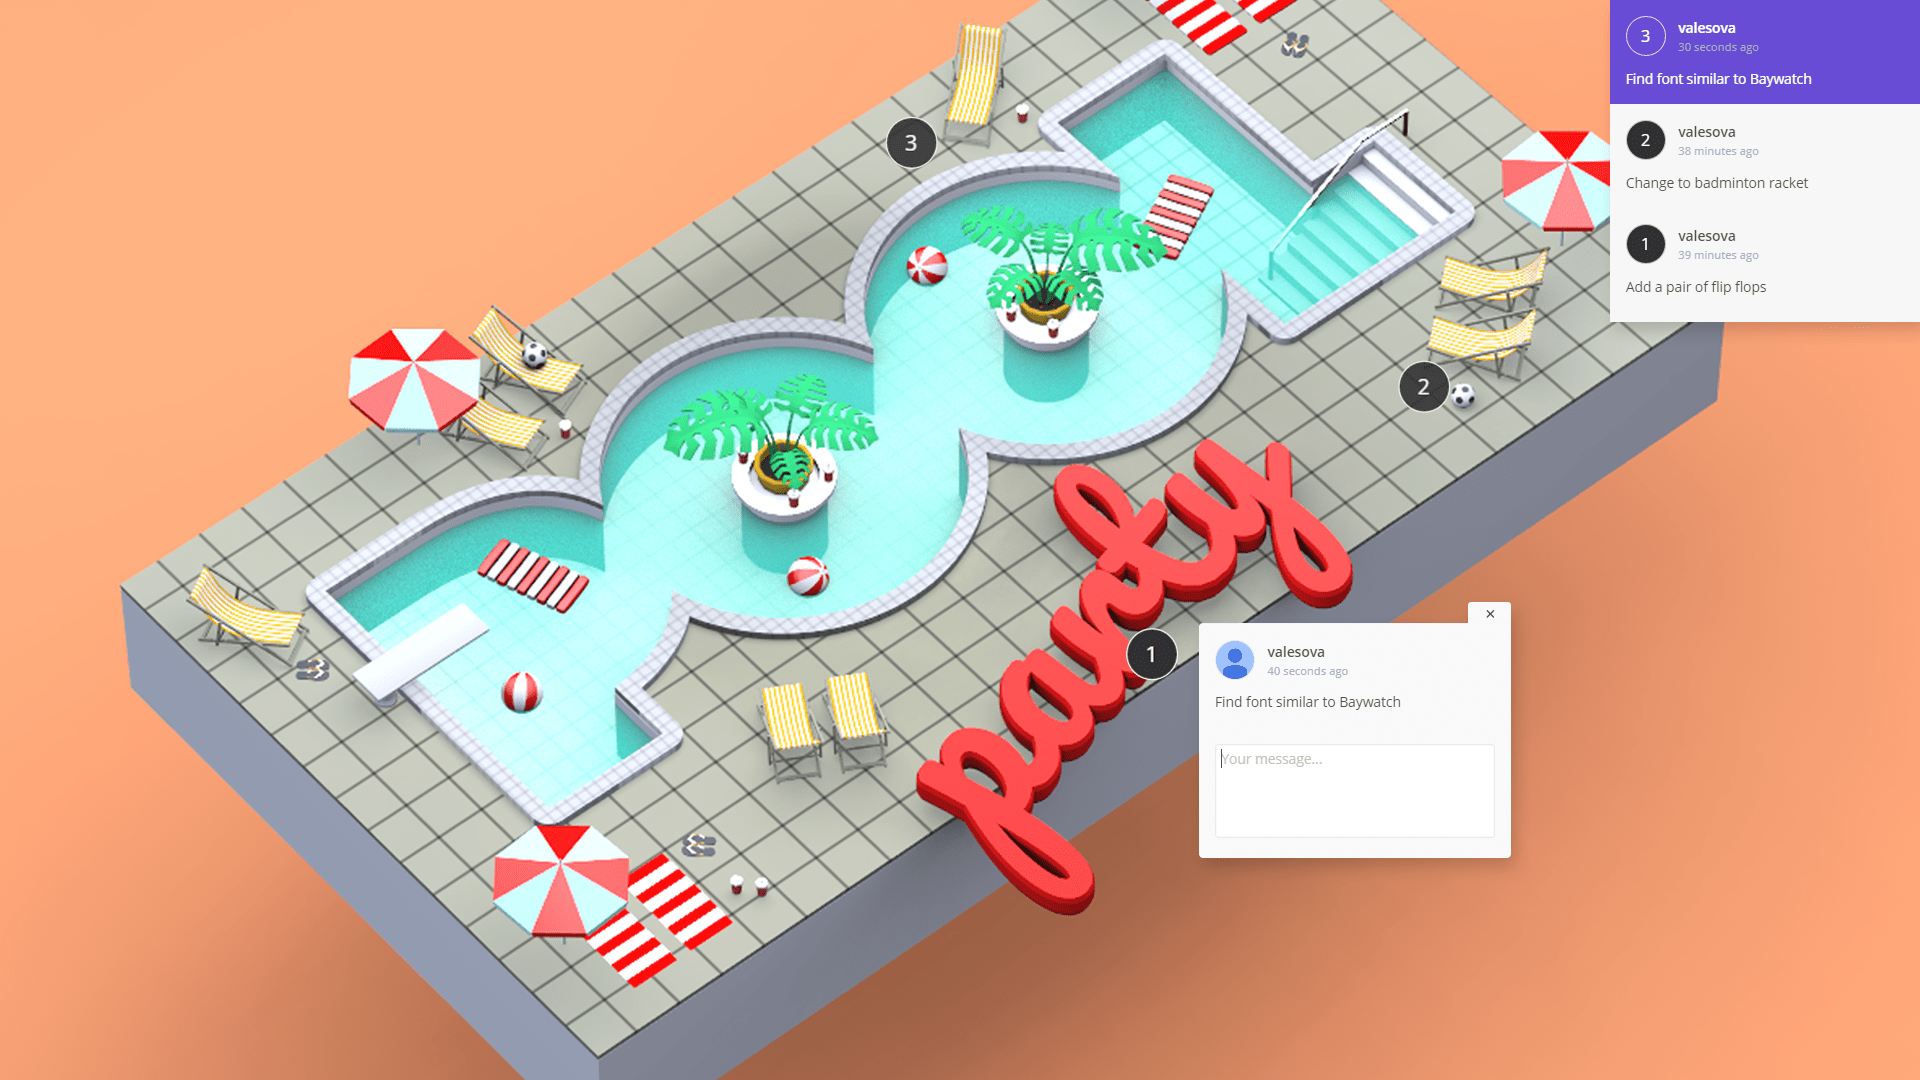 https://www.vectary.com/uploads/media-library/vectary-3d-typography-pool-party-text-design-comments-collaboration-7TUyUBfEmJtKvbKH1qJvnU.png